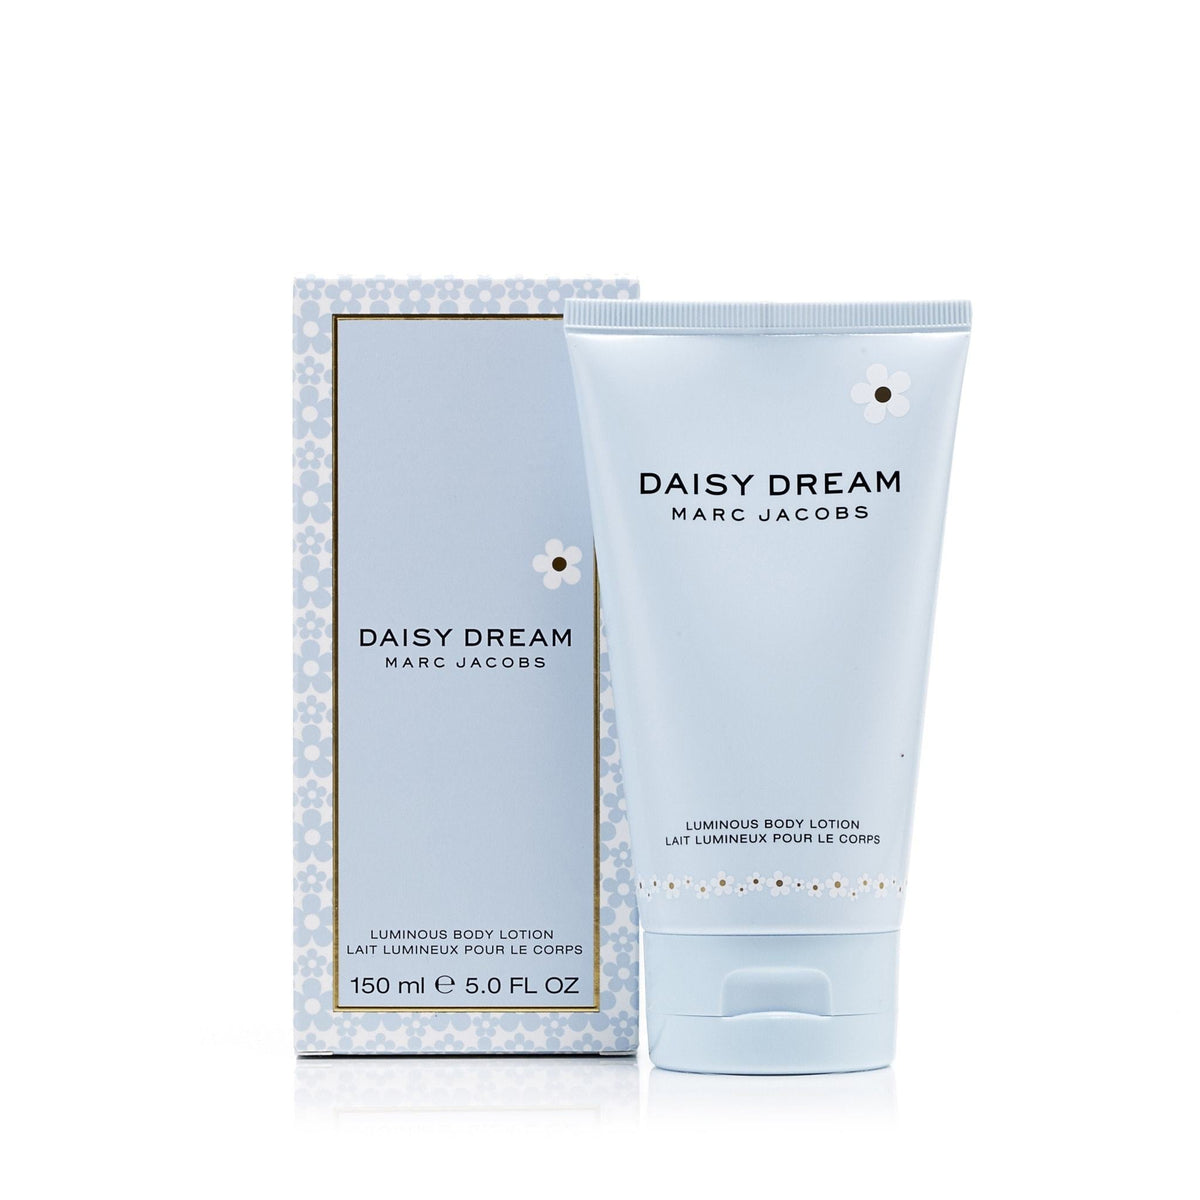 Daisy Dream Body Lotion for Women by Marc Jacobs